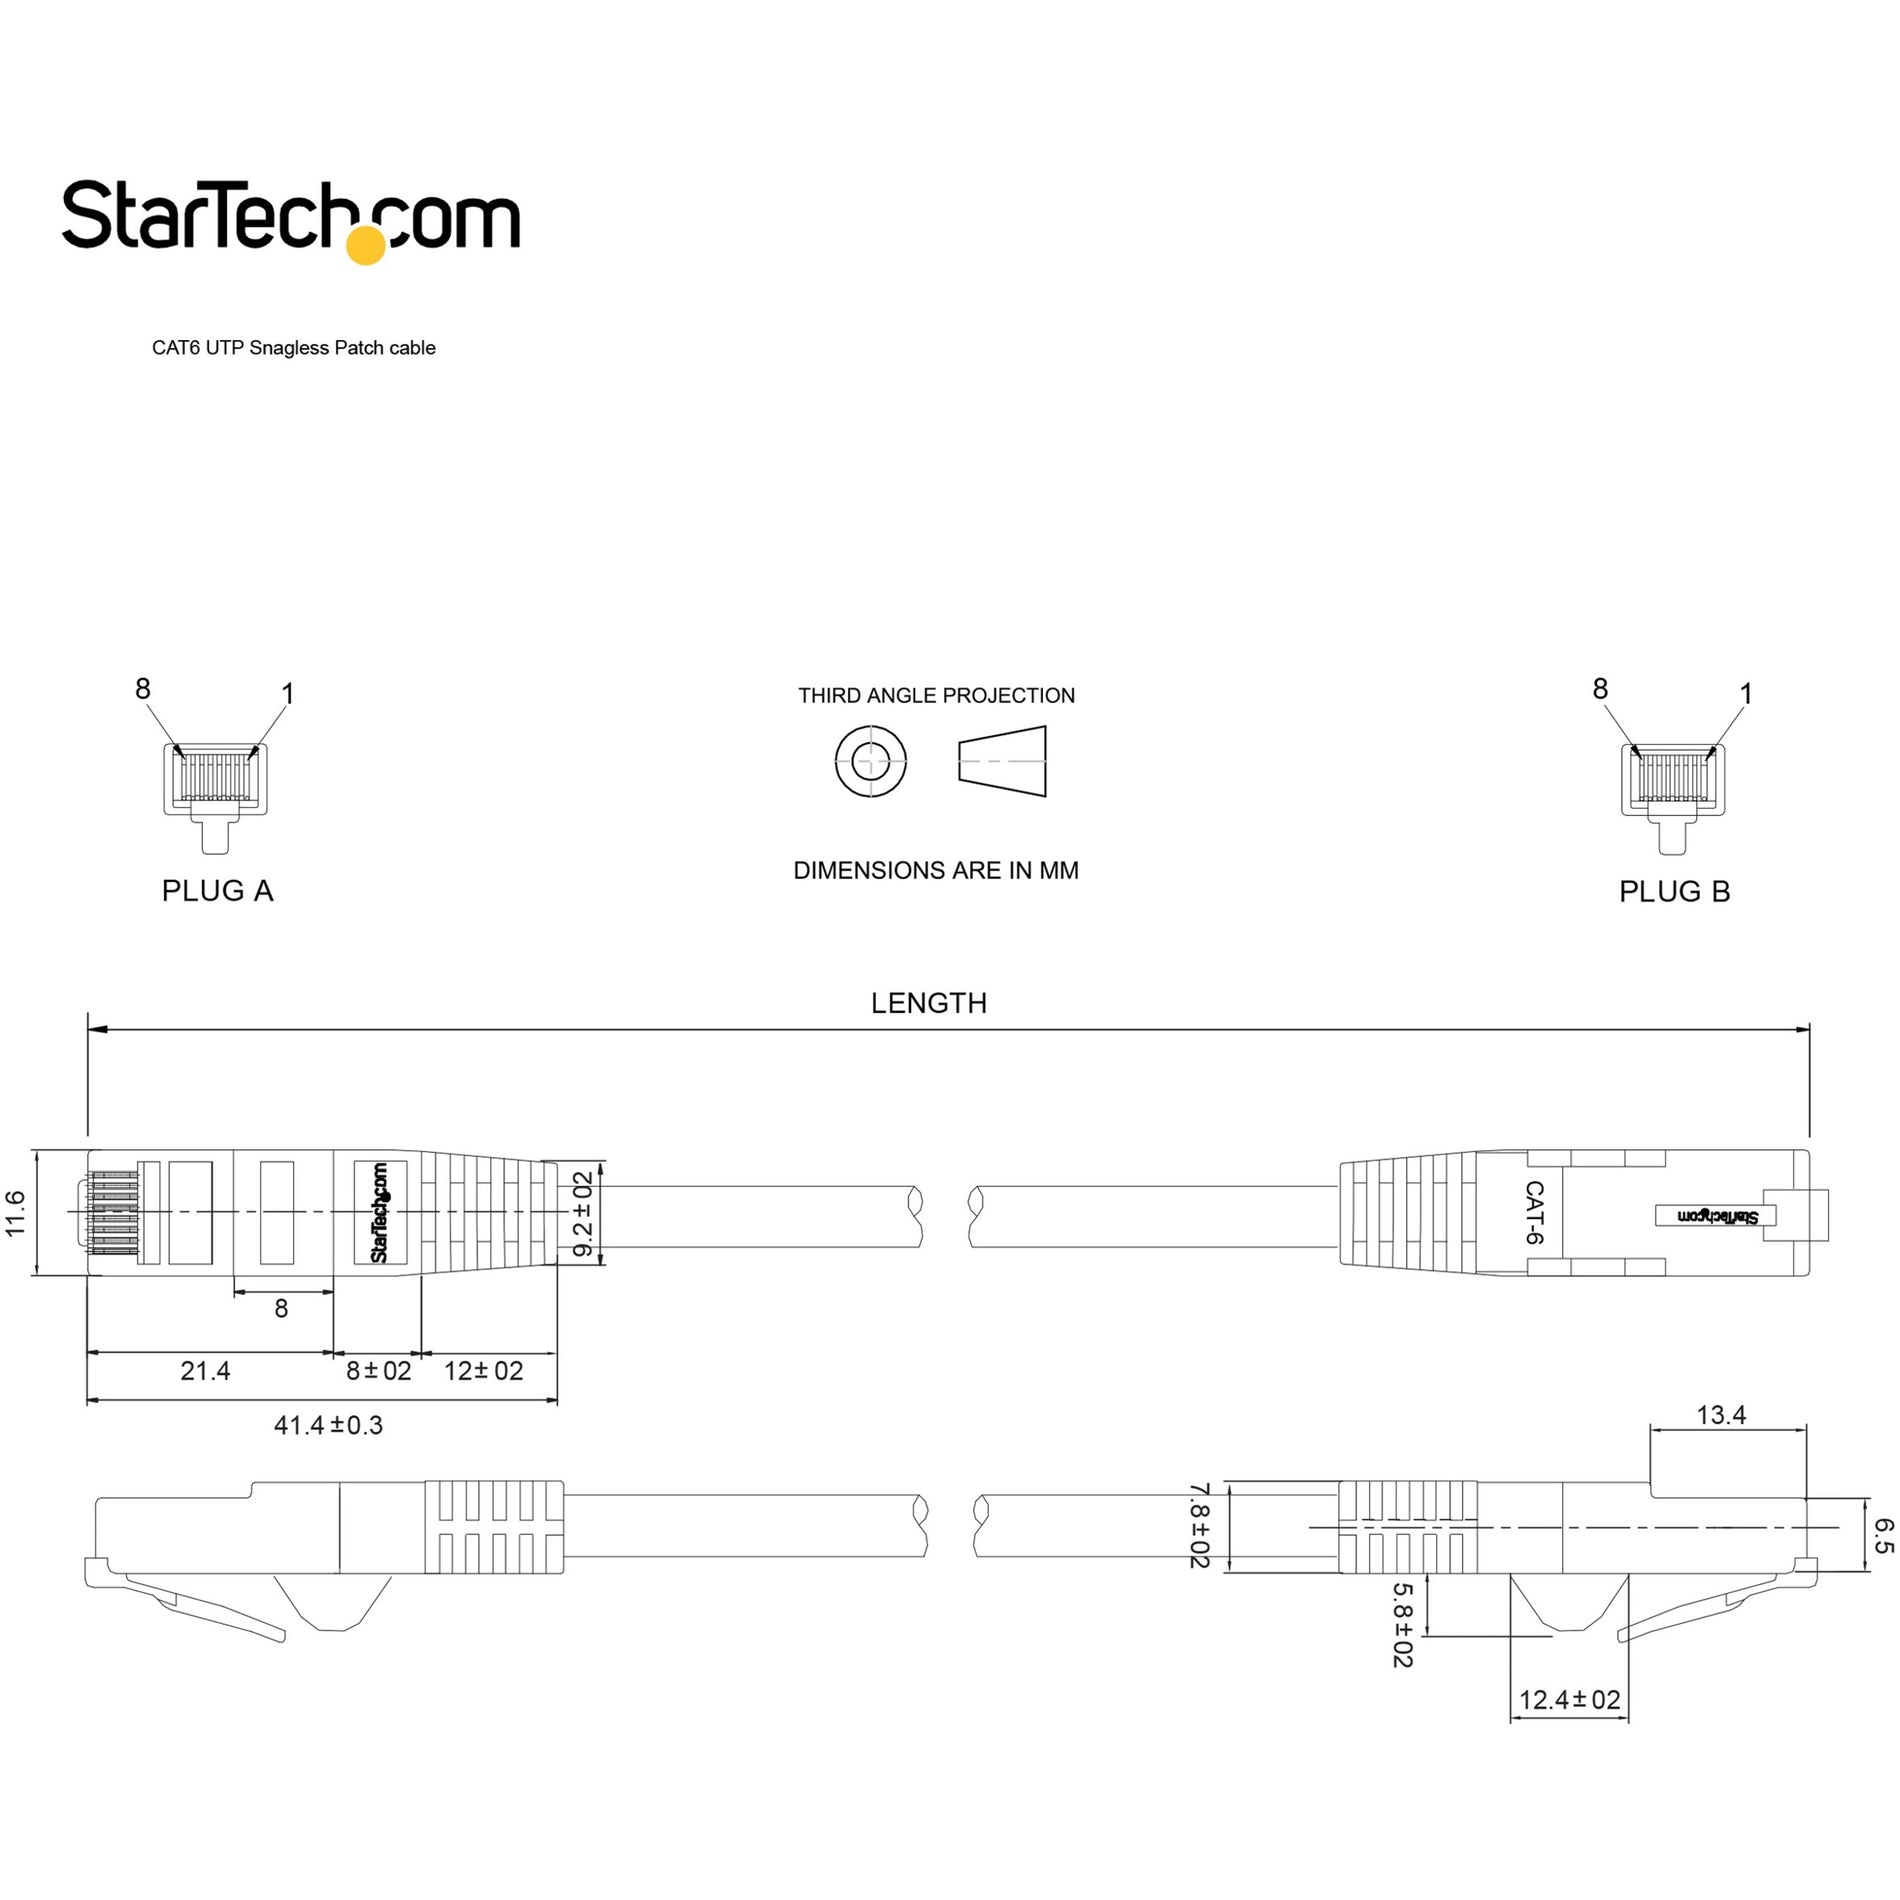 StarTech.com N6PATCH5GR 5 ft Gray Gigabit Snagless RJ45 UTP Cat6 Patch Cable, High-Speed Ethernet Cord